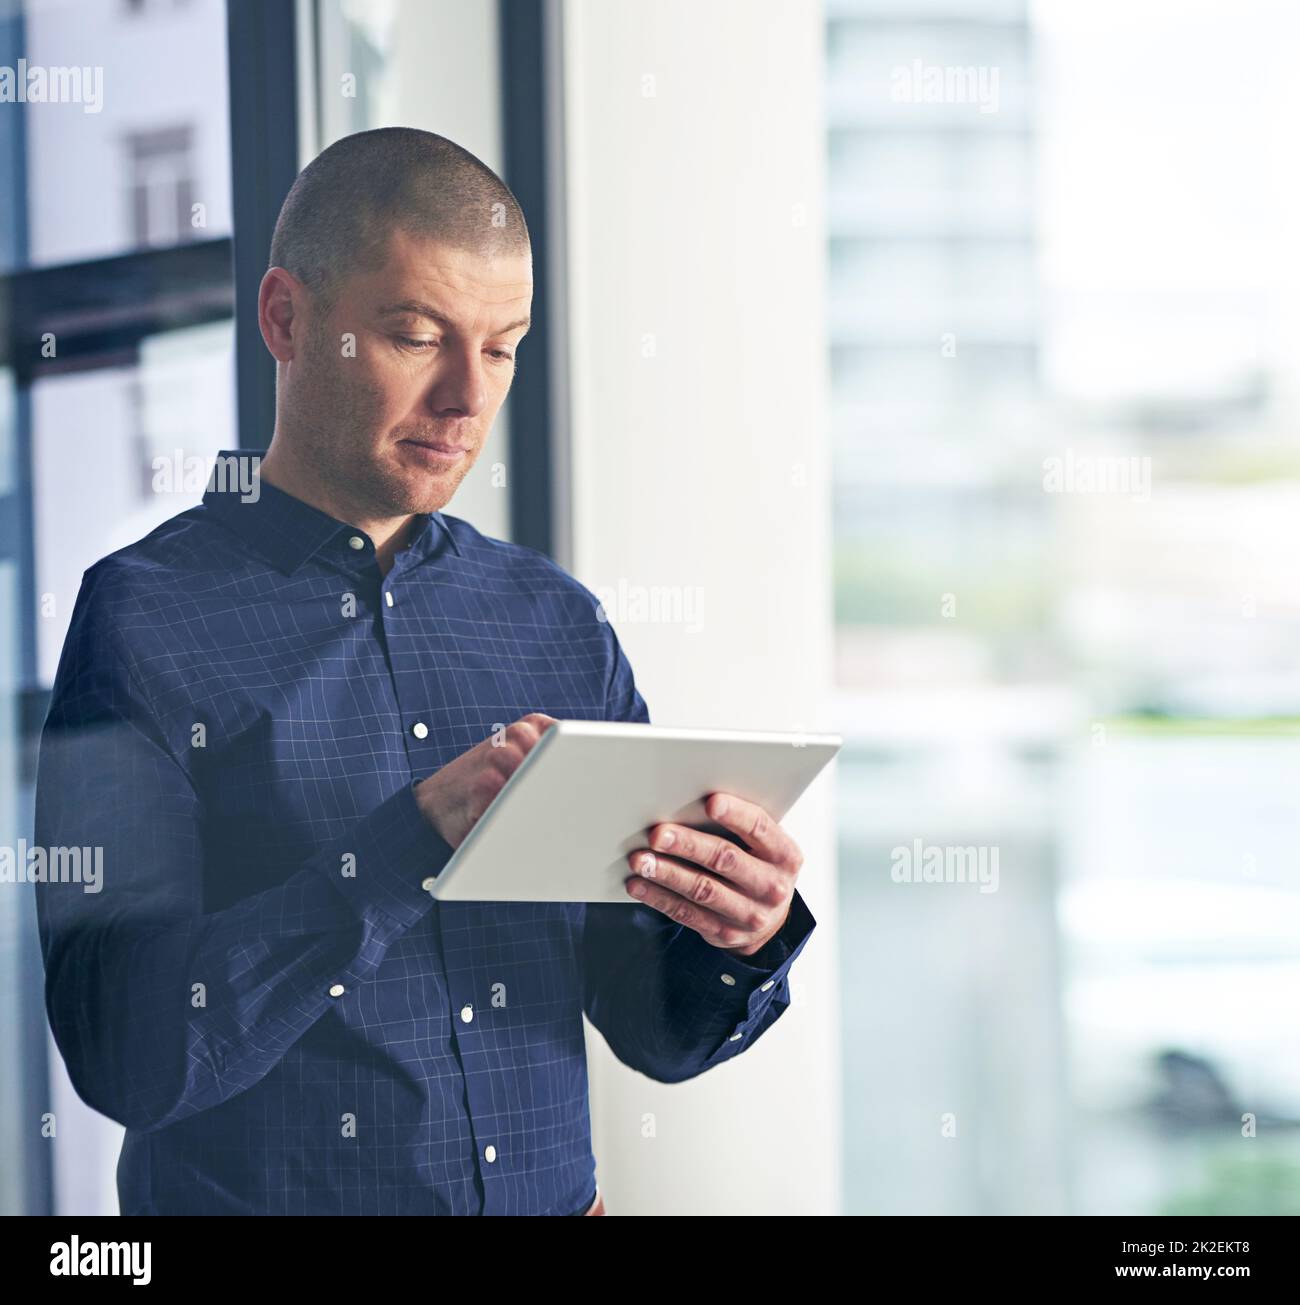 Smarter business research supported by smart technology. Shot of a businessman using a digital tablet in a modern office. Stock Photo